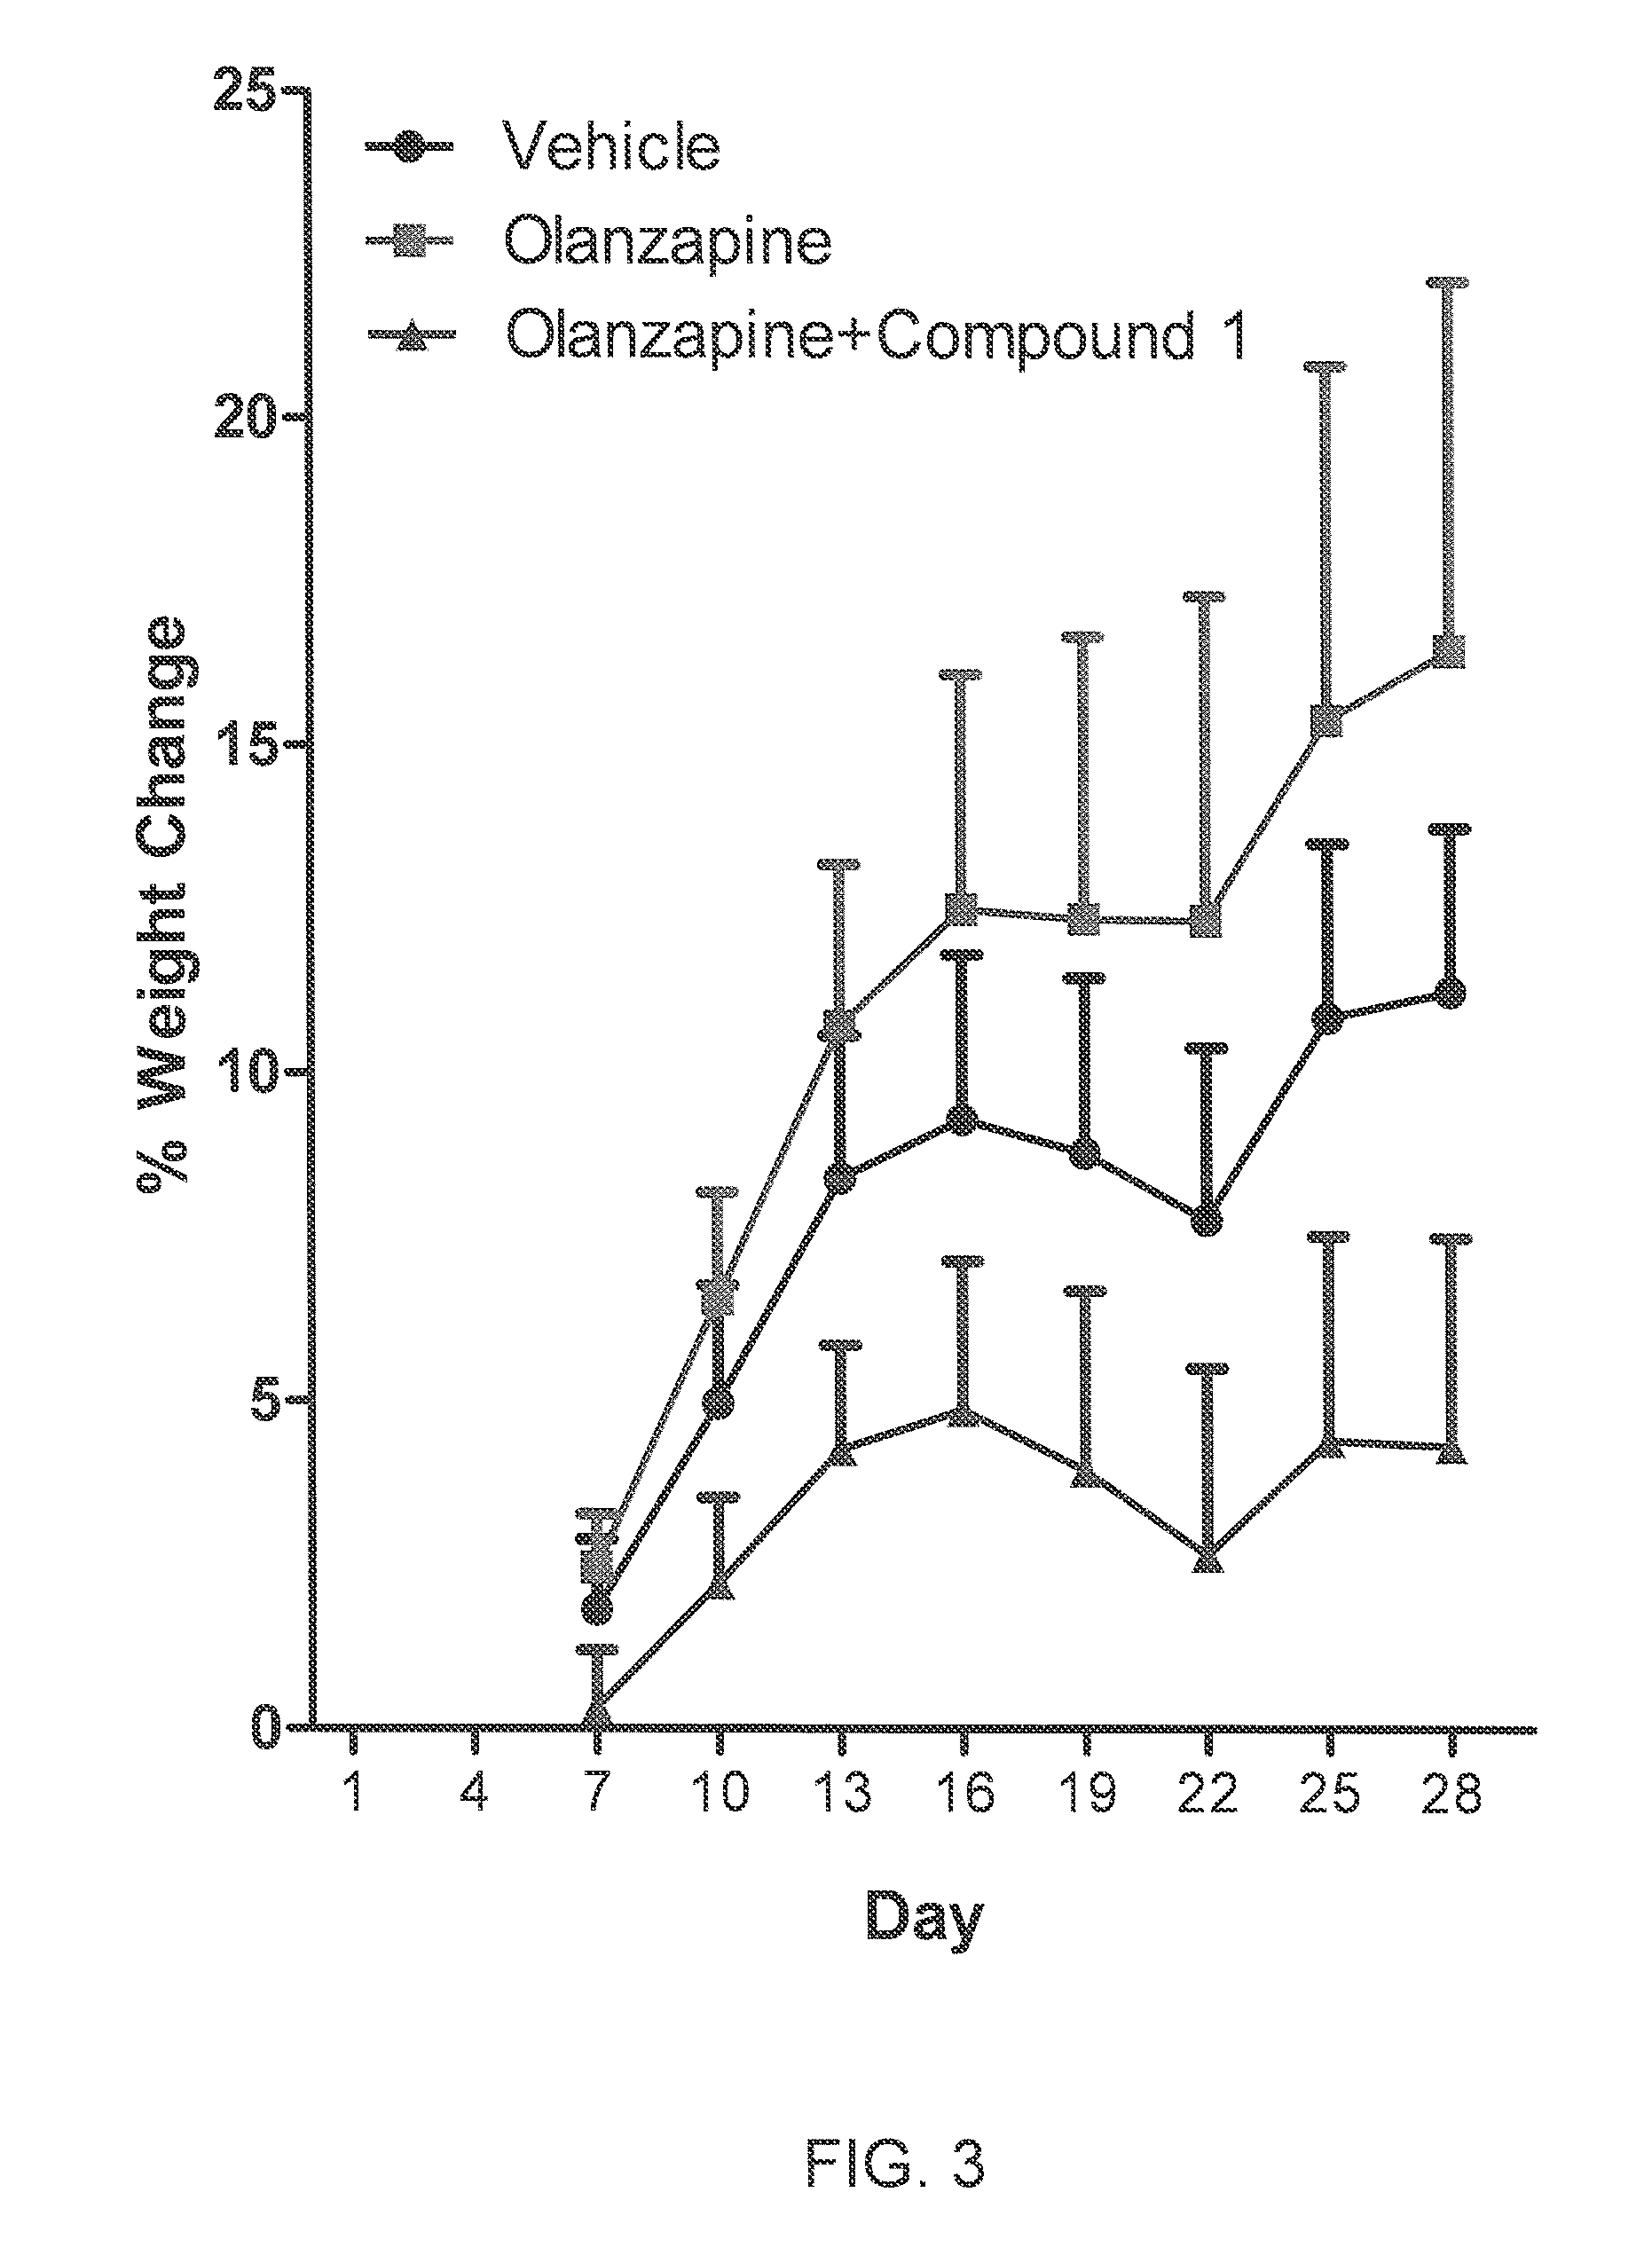 Methods for Treating Antipsychotic-Induced Weight Gain